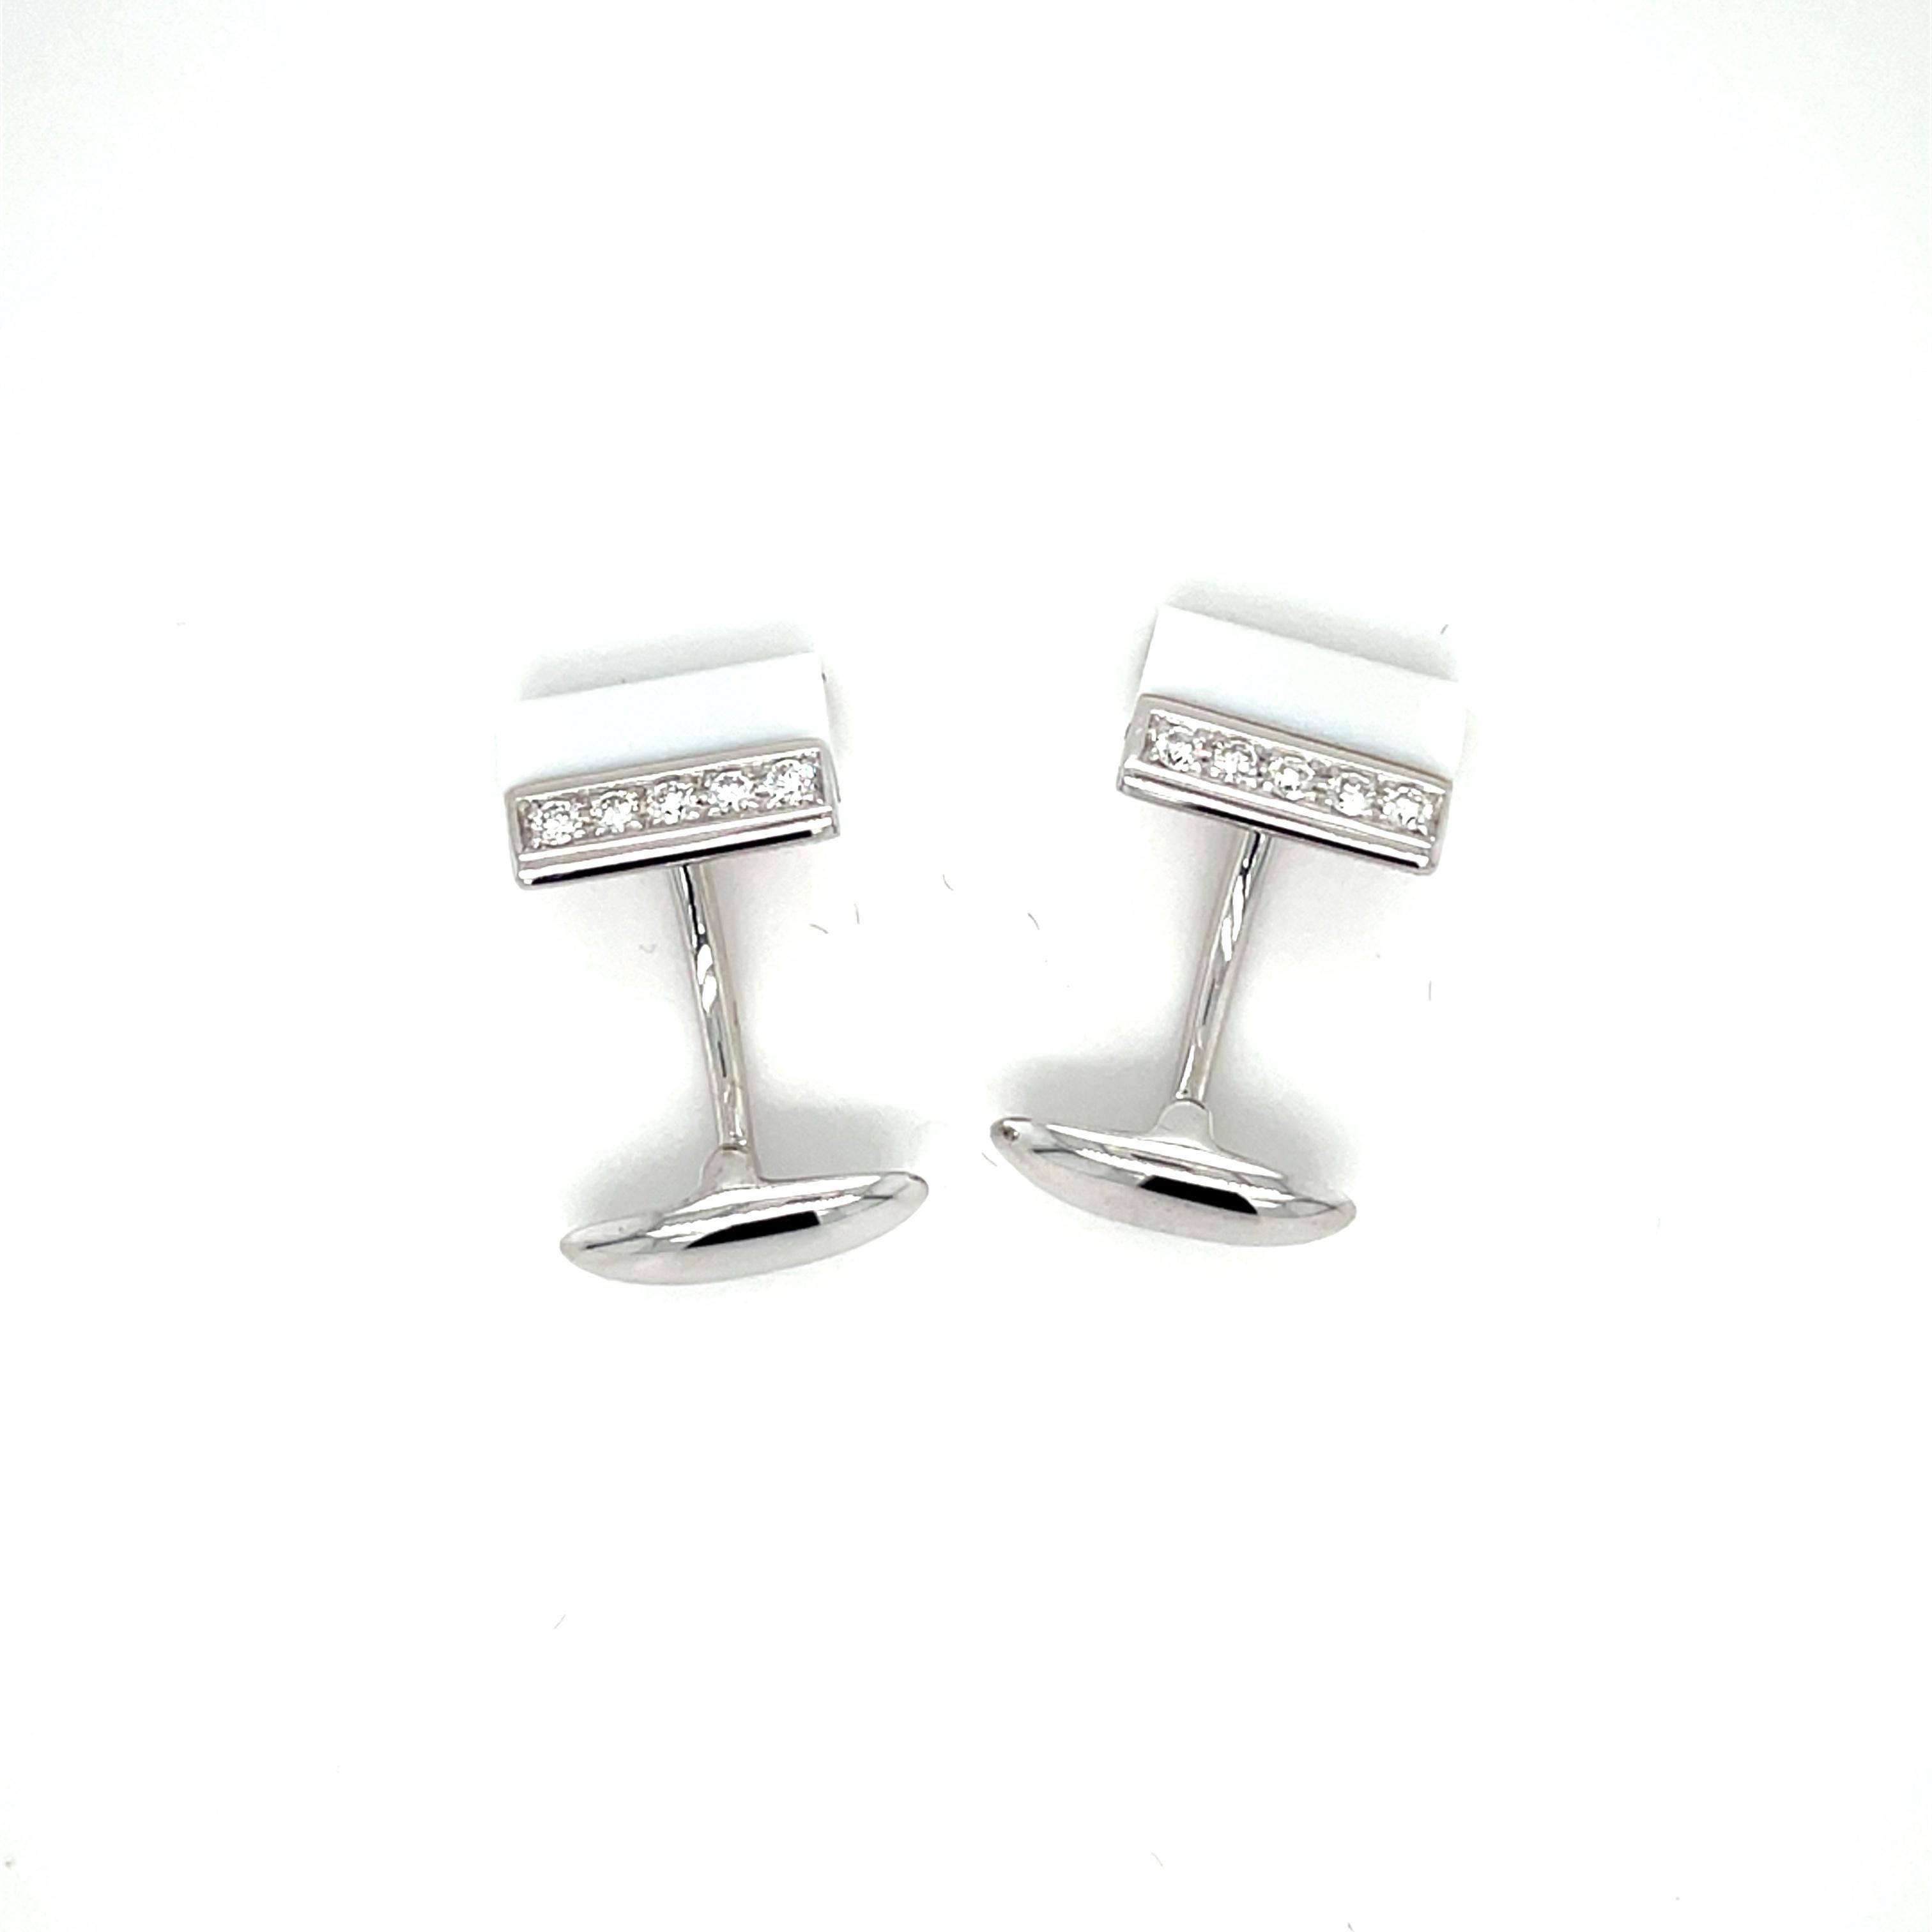 These 18K white gold unique cufflinks are from Wedding Collection. These very elegant cufflinks are made with white gold in total of 11.20gr, diamonds G color VS clarity in total of  0.27 carat and a semiprecious stone in total 9.50 ct. These